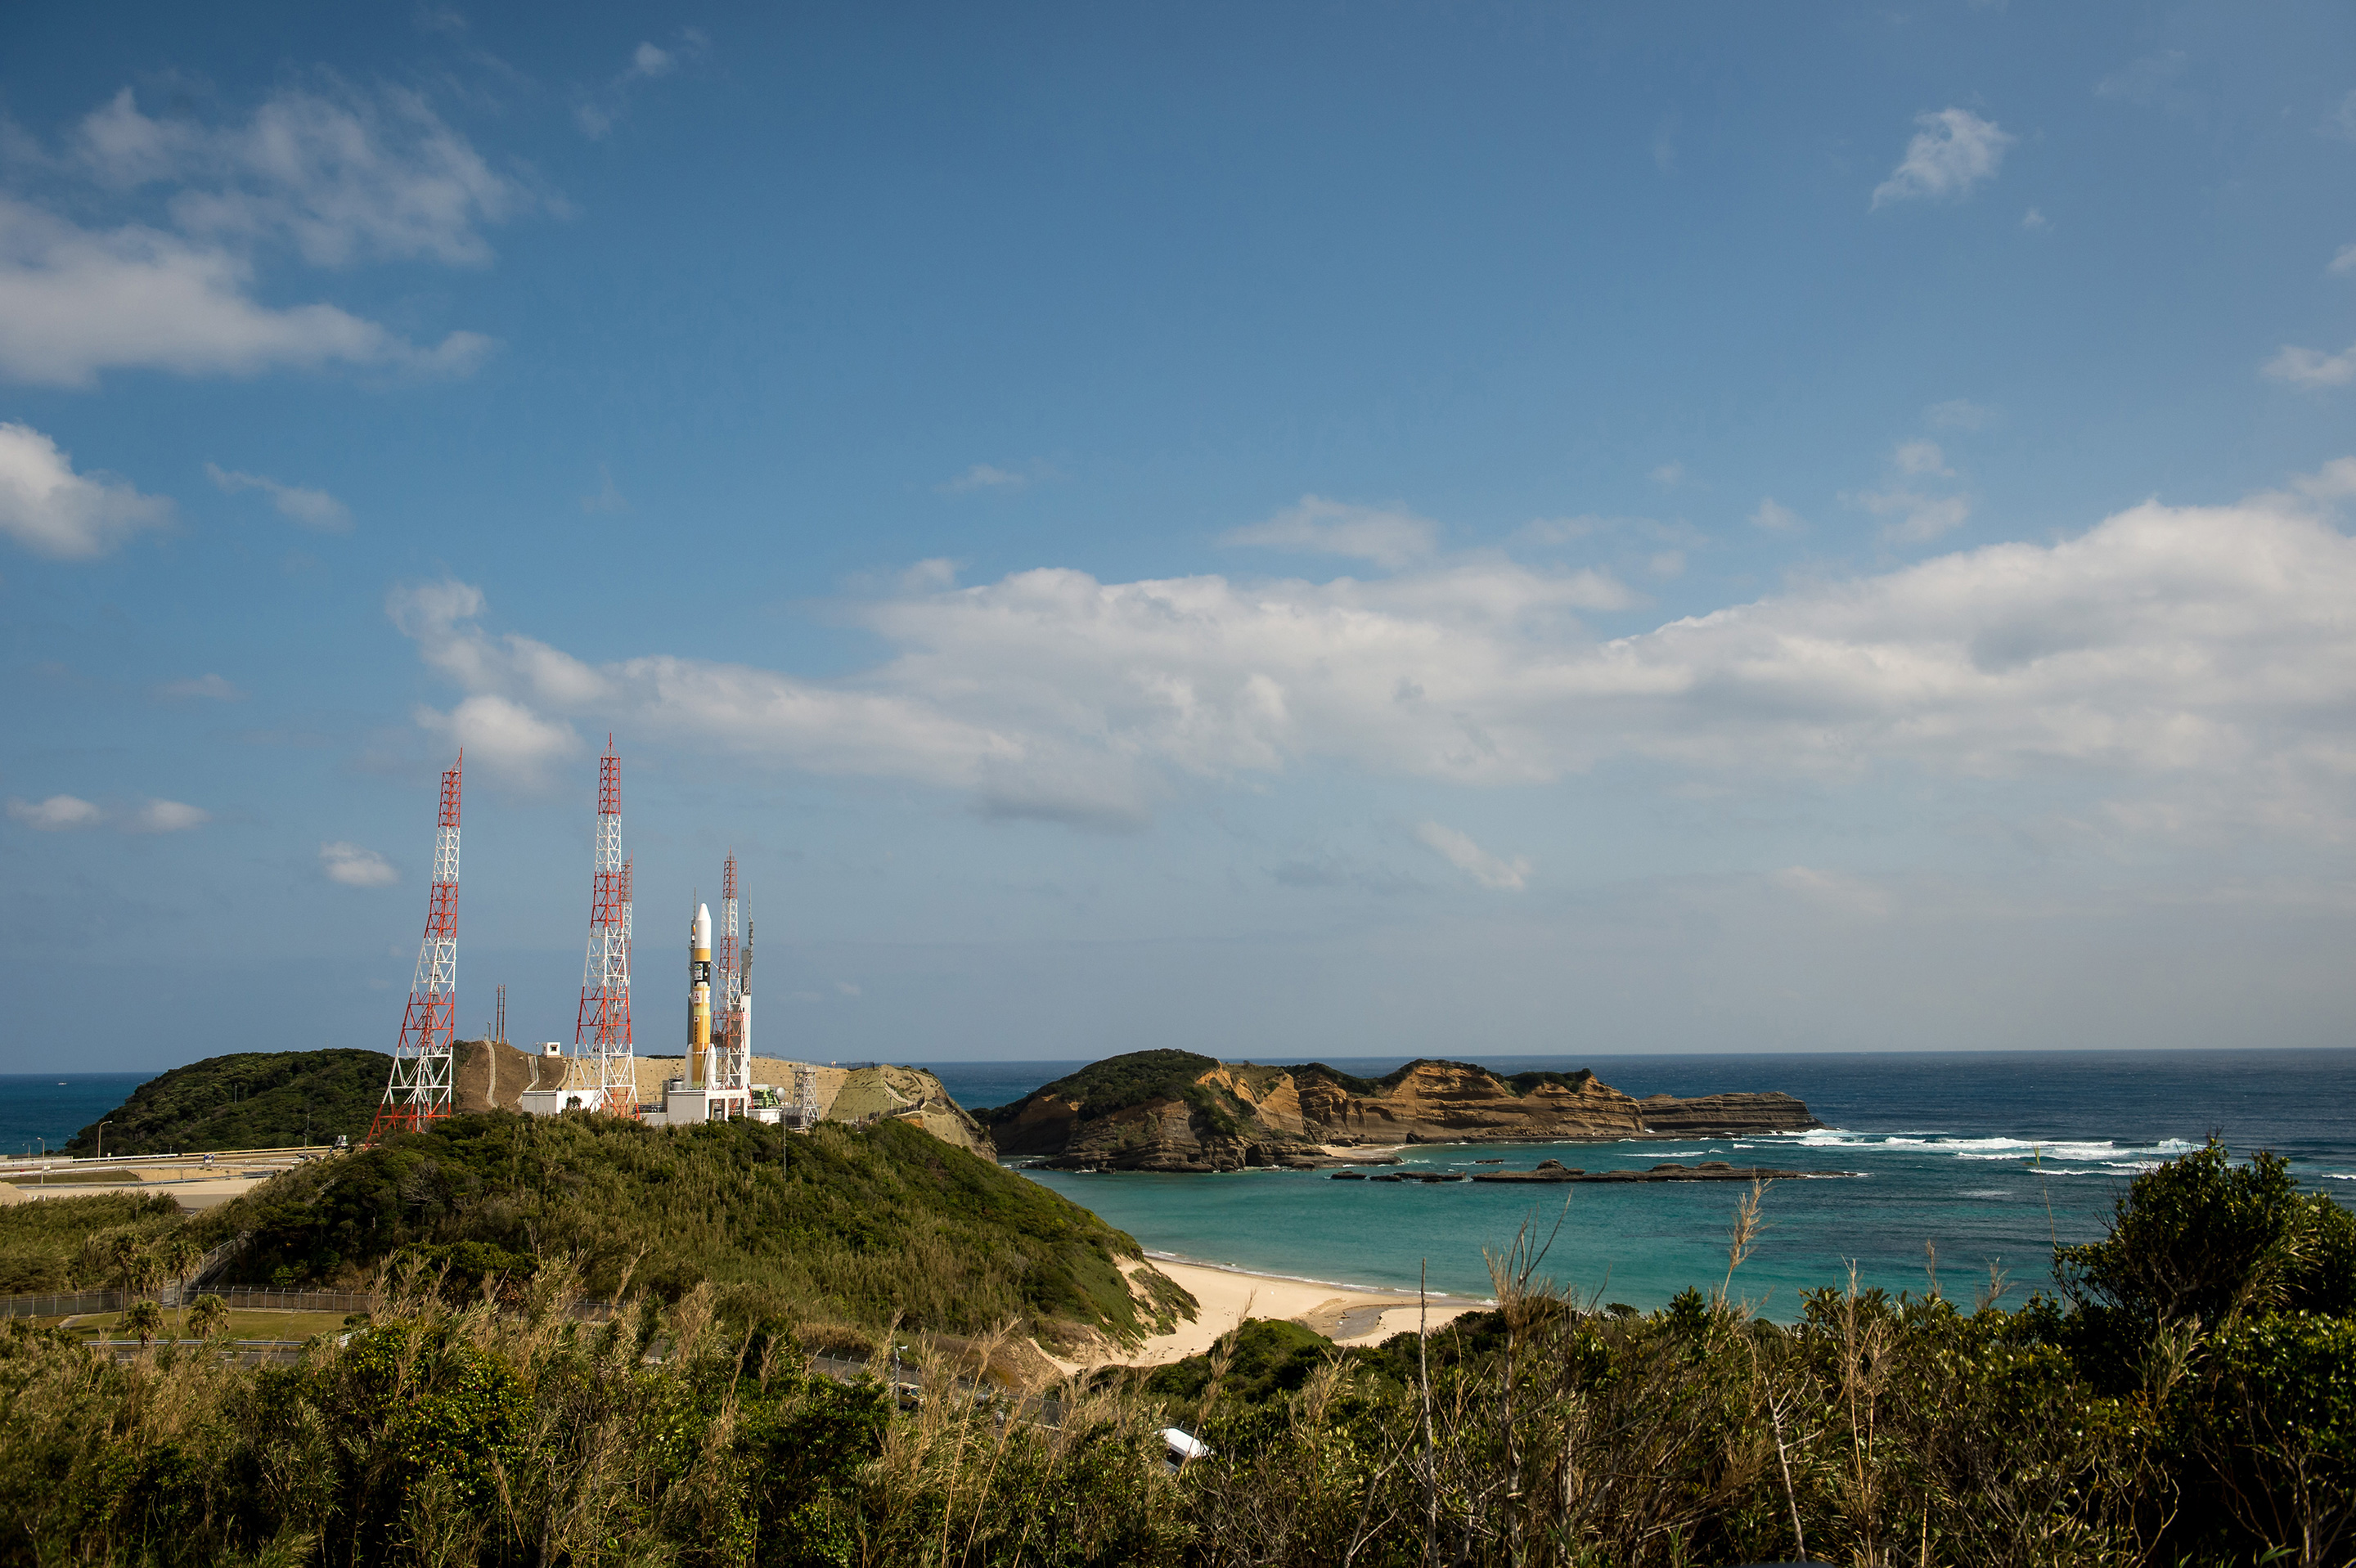 A Japanese H-IIA rocket carrying the NASA-Japan Aerospace Exploration Agency (JAXA), Global Precipitation Measurement (GPM) Core Observatory is seen as it rolls out to launch pad 1 of the Tanegashima Space Center on Feb. 27, 2014. The GPM spacecraft will collect information that unifies data from an international network of satellites to map global rainfall and snowfall every three hours. Photo: NASA/Bill Ingalls